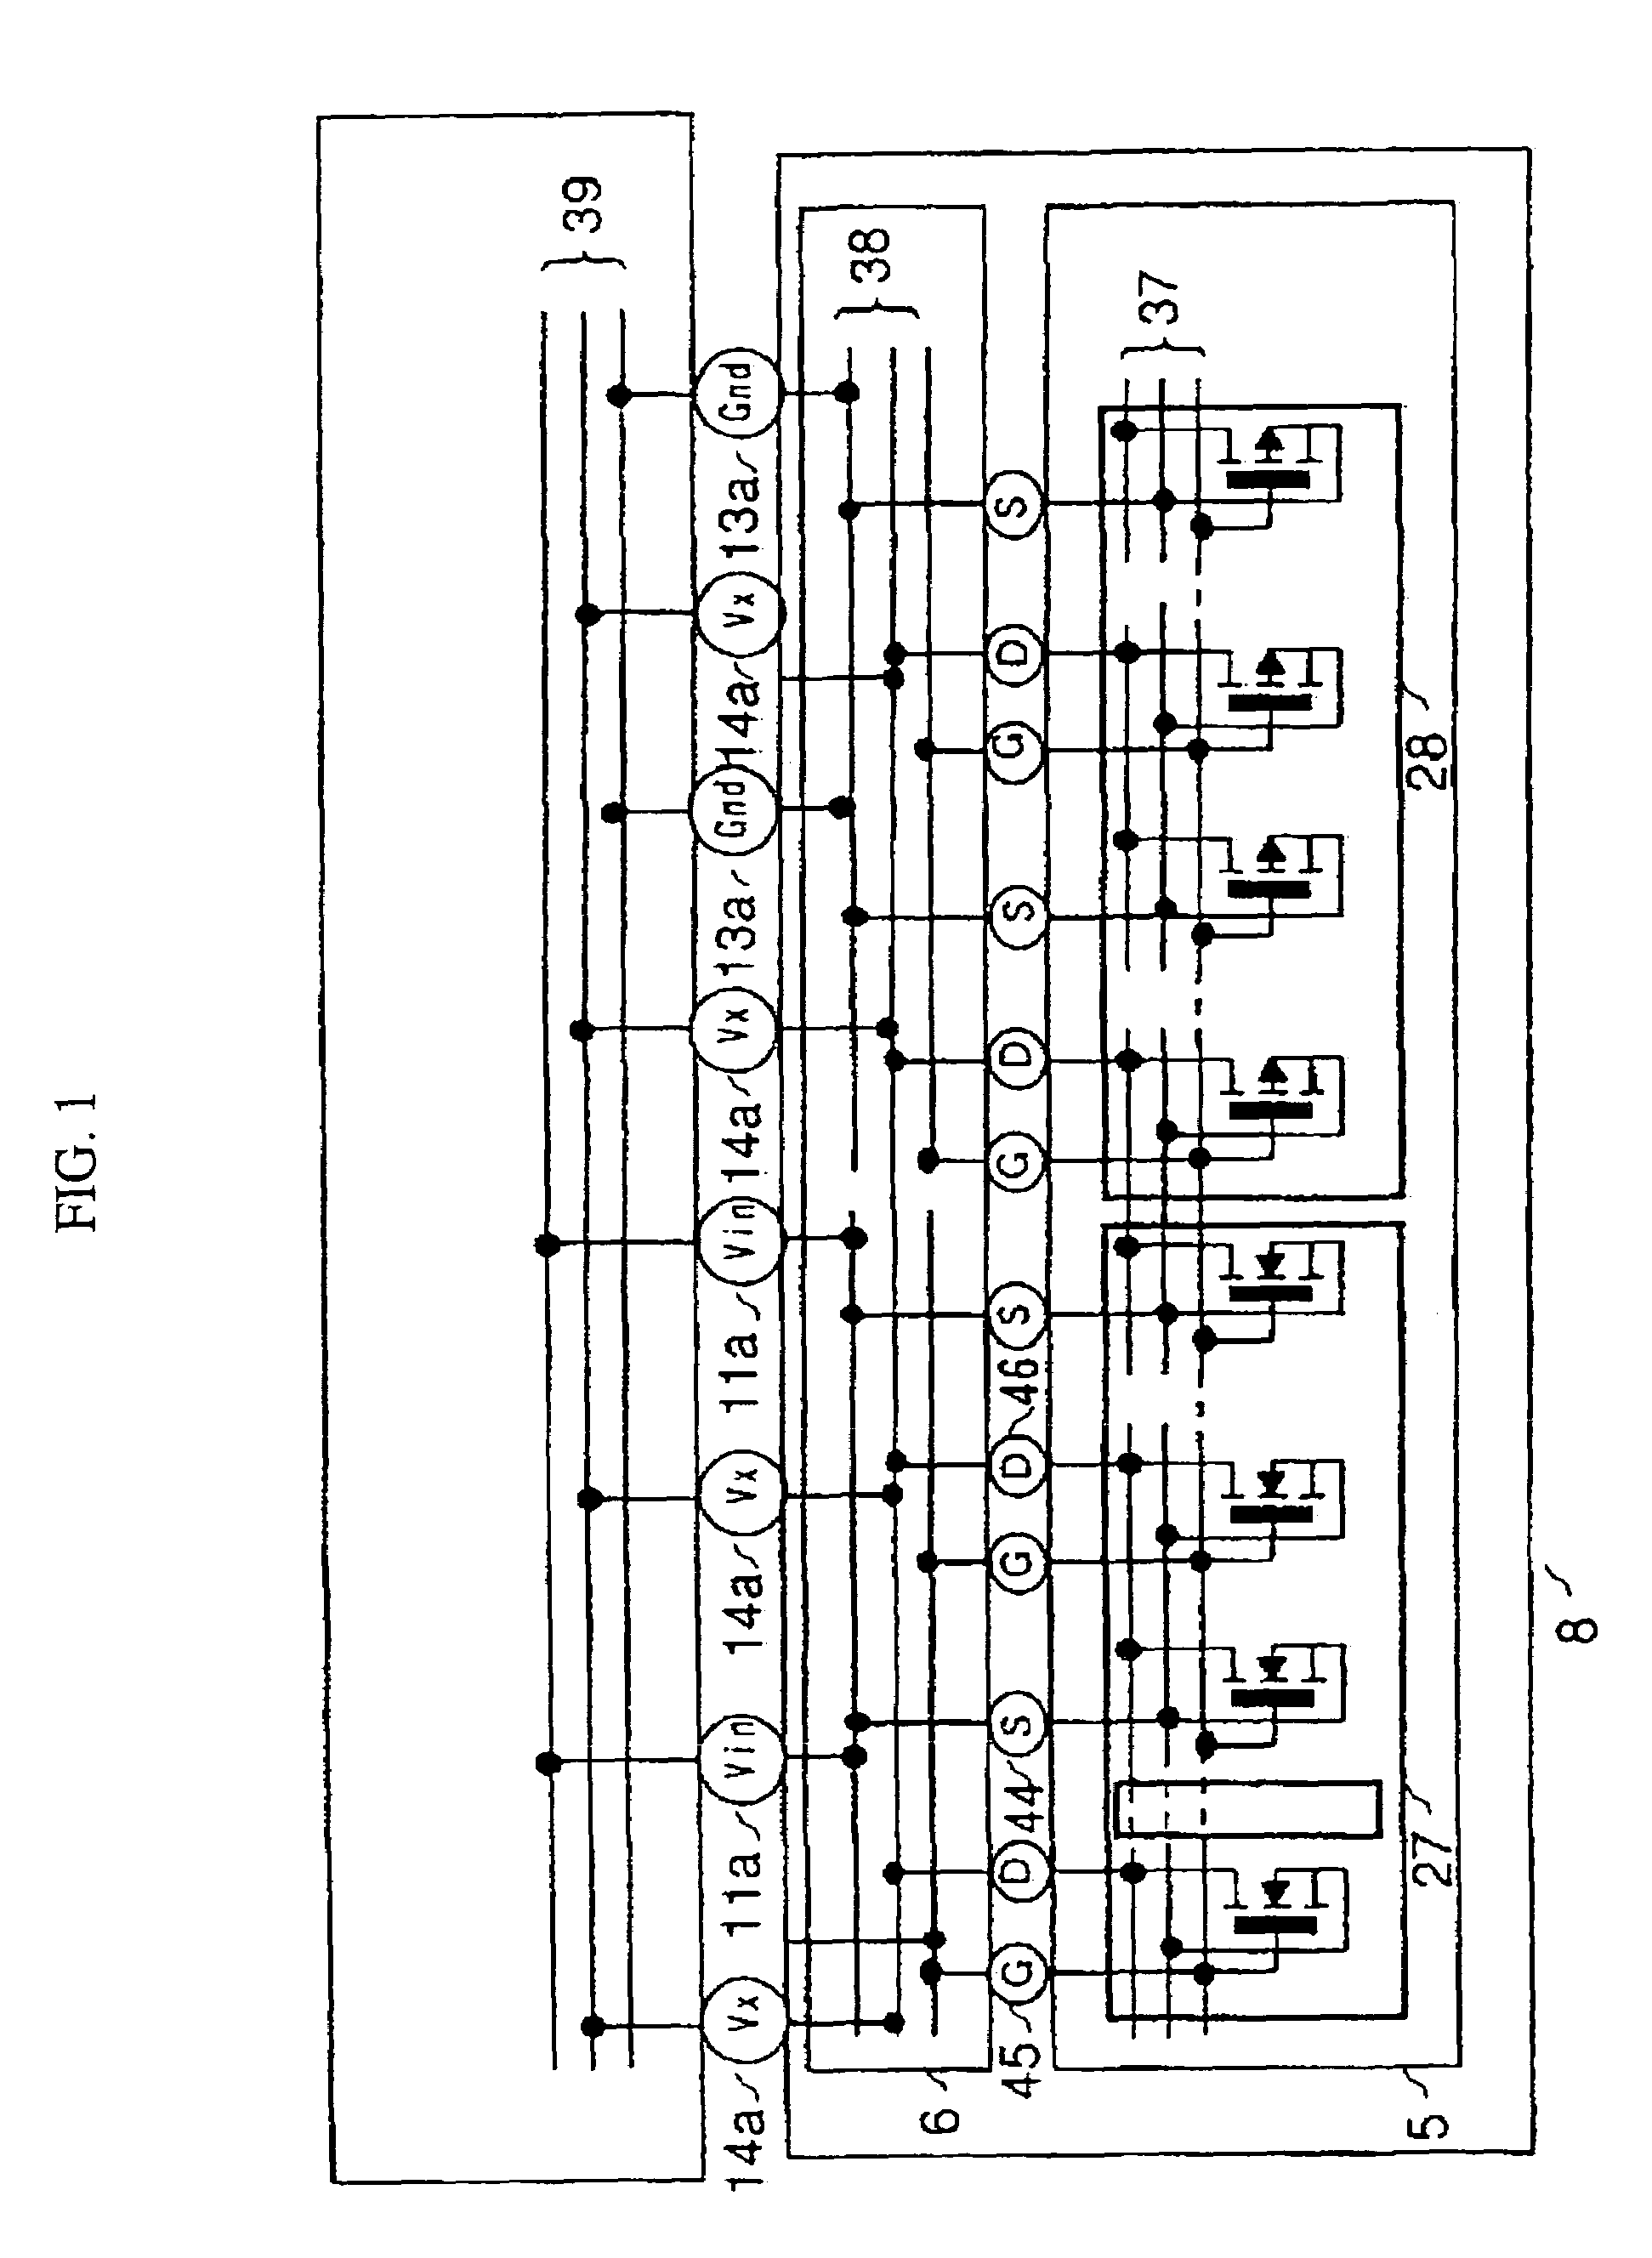 Power MOSFET with reduced dgate resistance